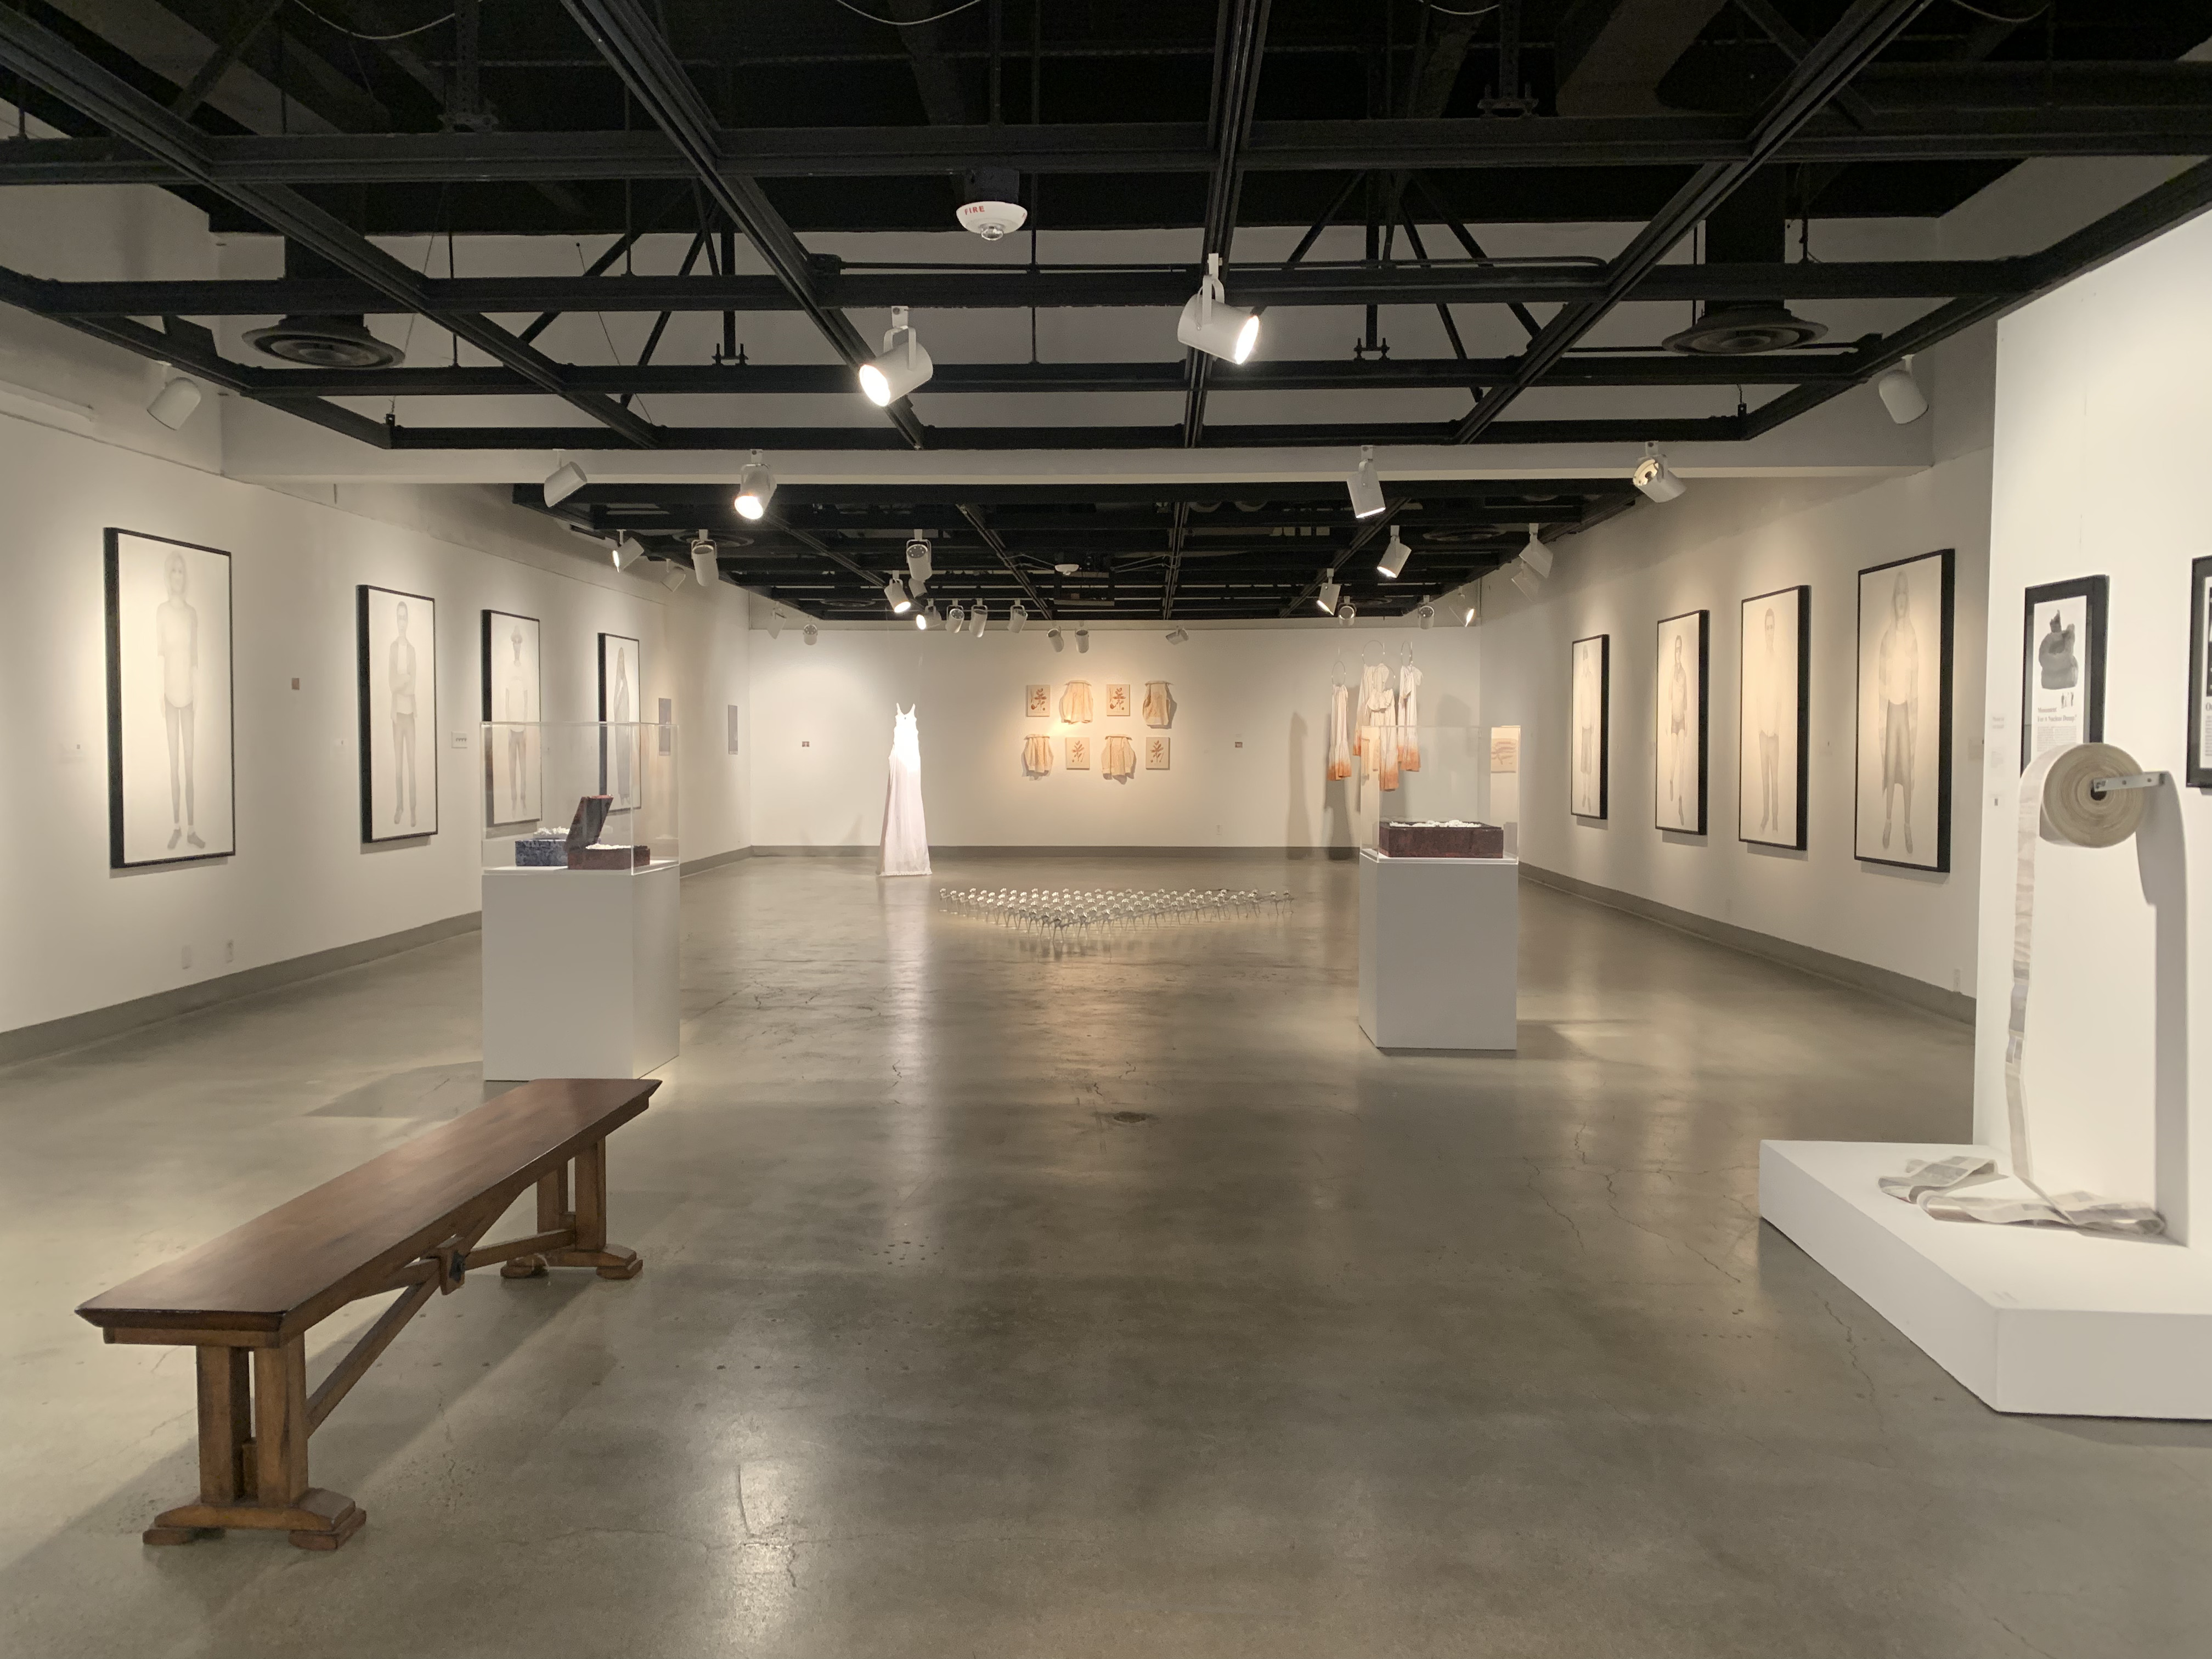 Installation View, Corridor of Gallery, Black, White & Shades of Grey Exhibition, Jan. 18, 2022 to Mar. 27, 2022.